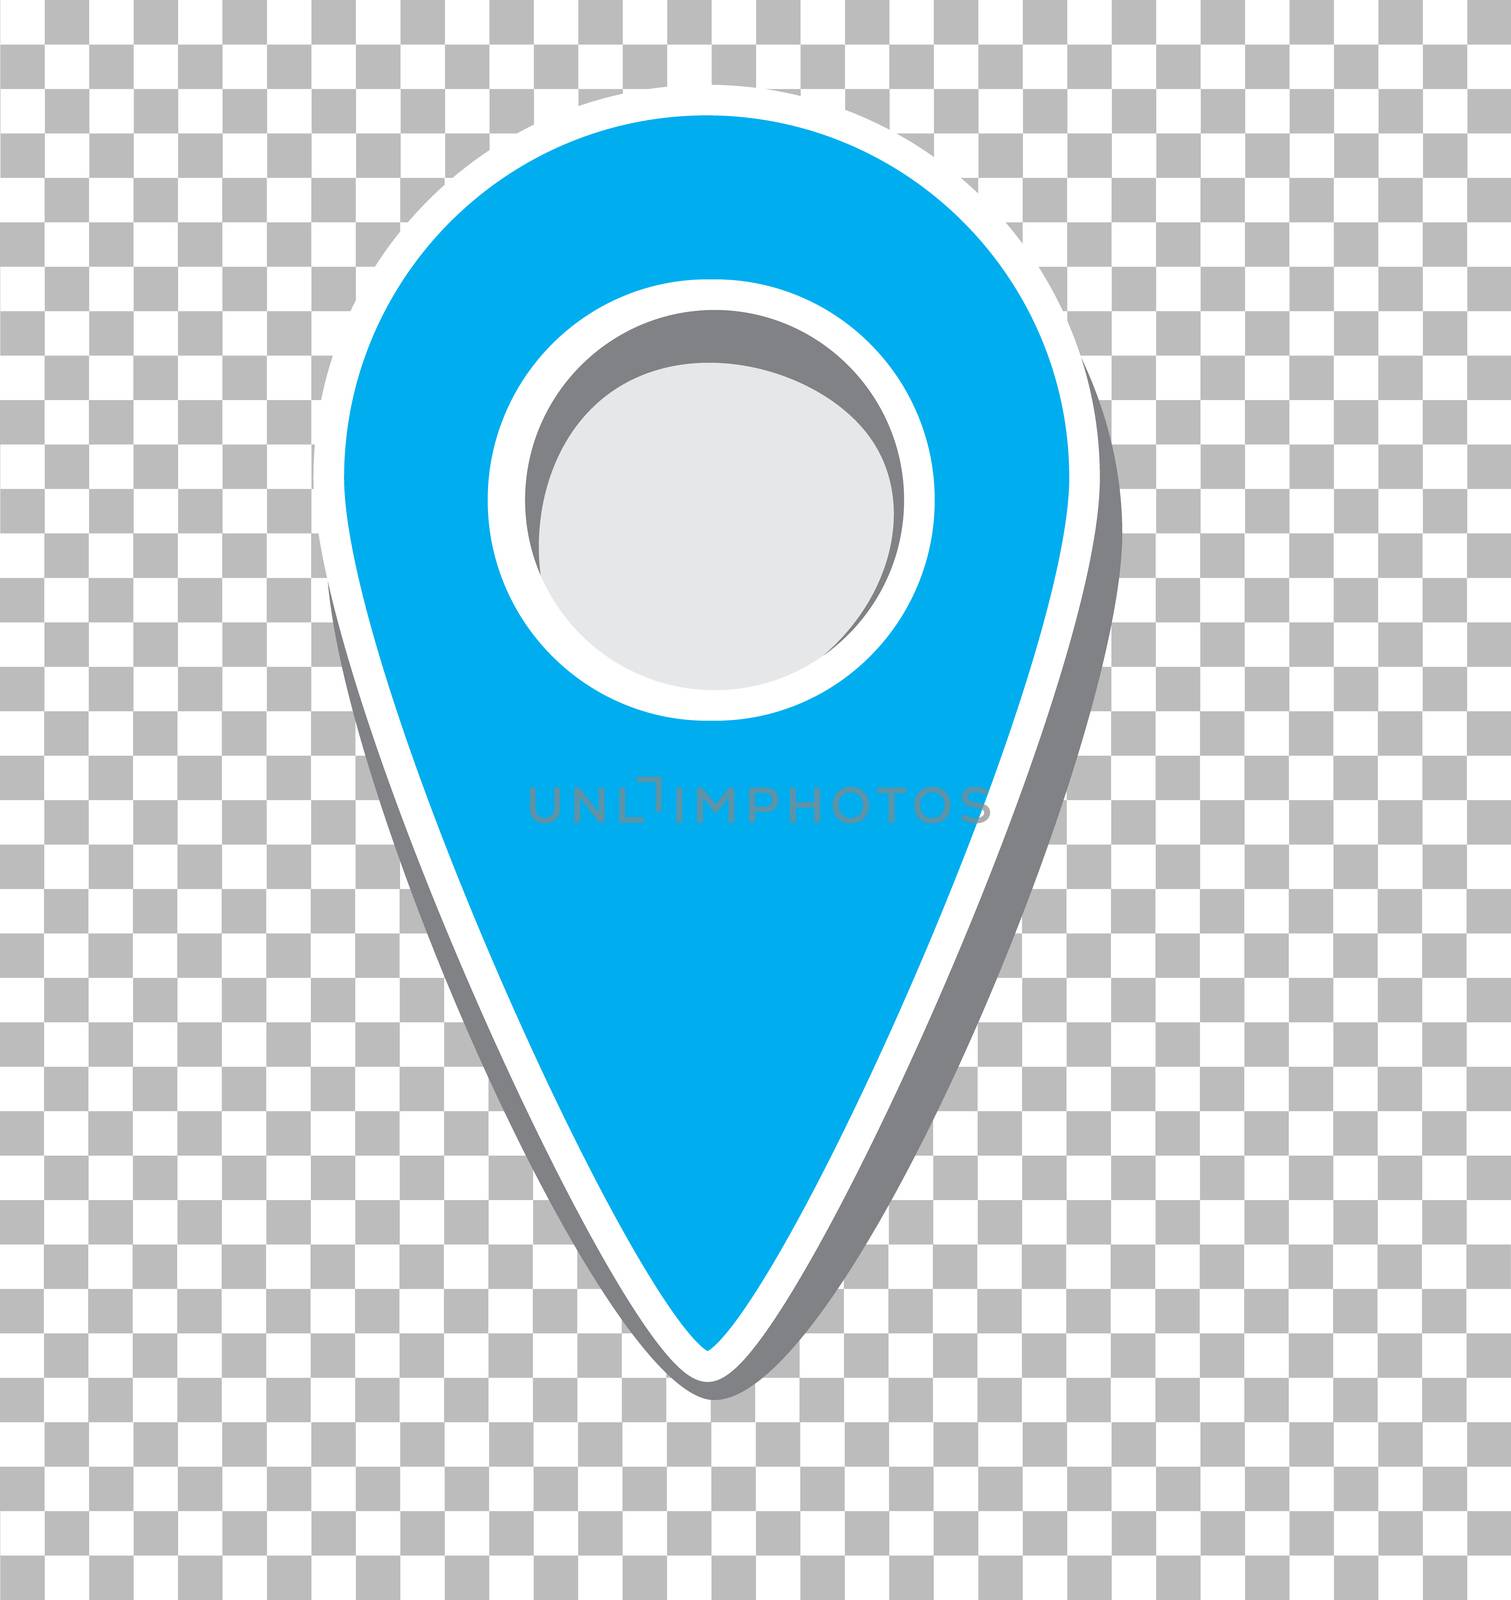 Marker pointer icon on white background. flat style. Map point icon for your web site design, logo, app, UI. navigator symbol. pin sign. 